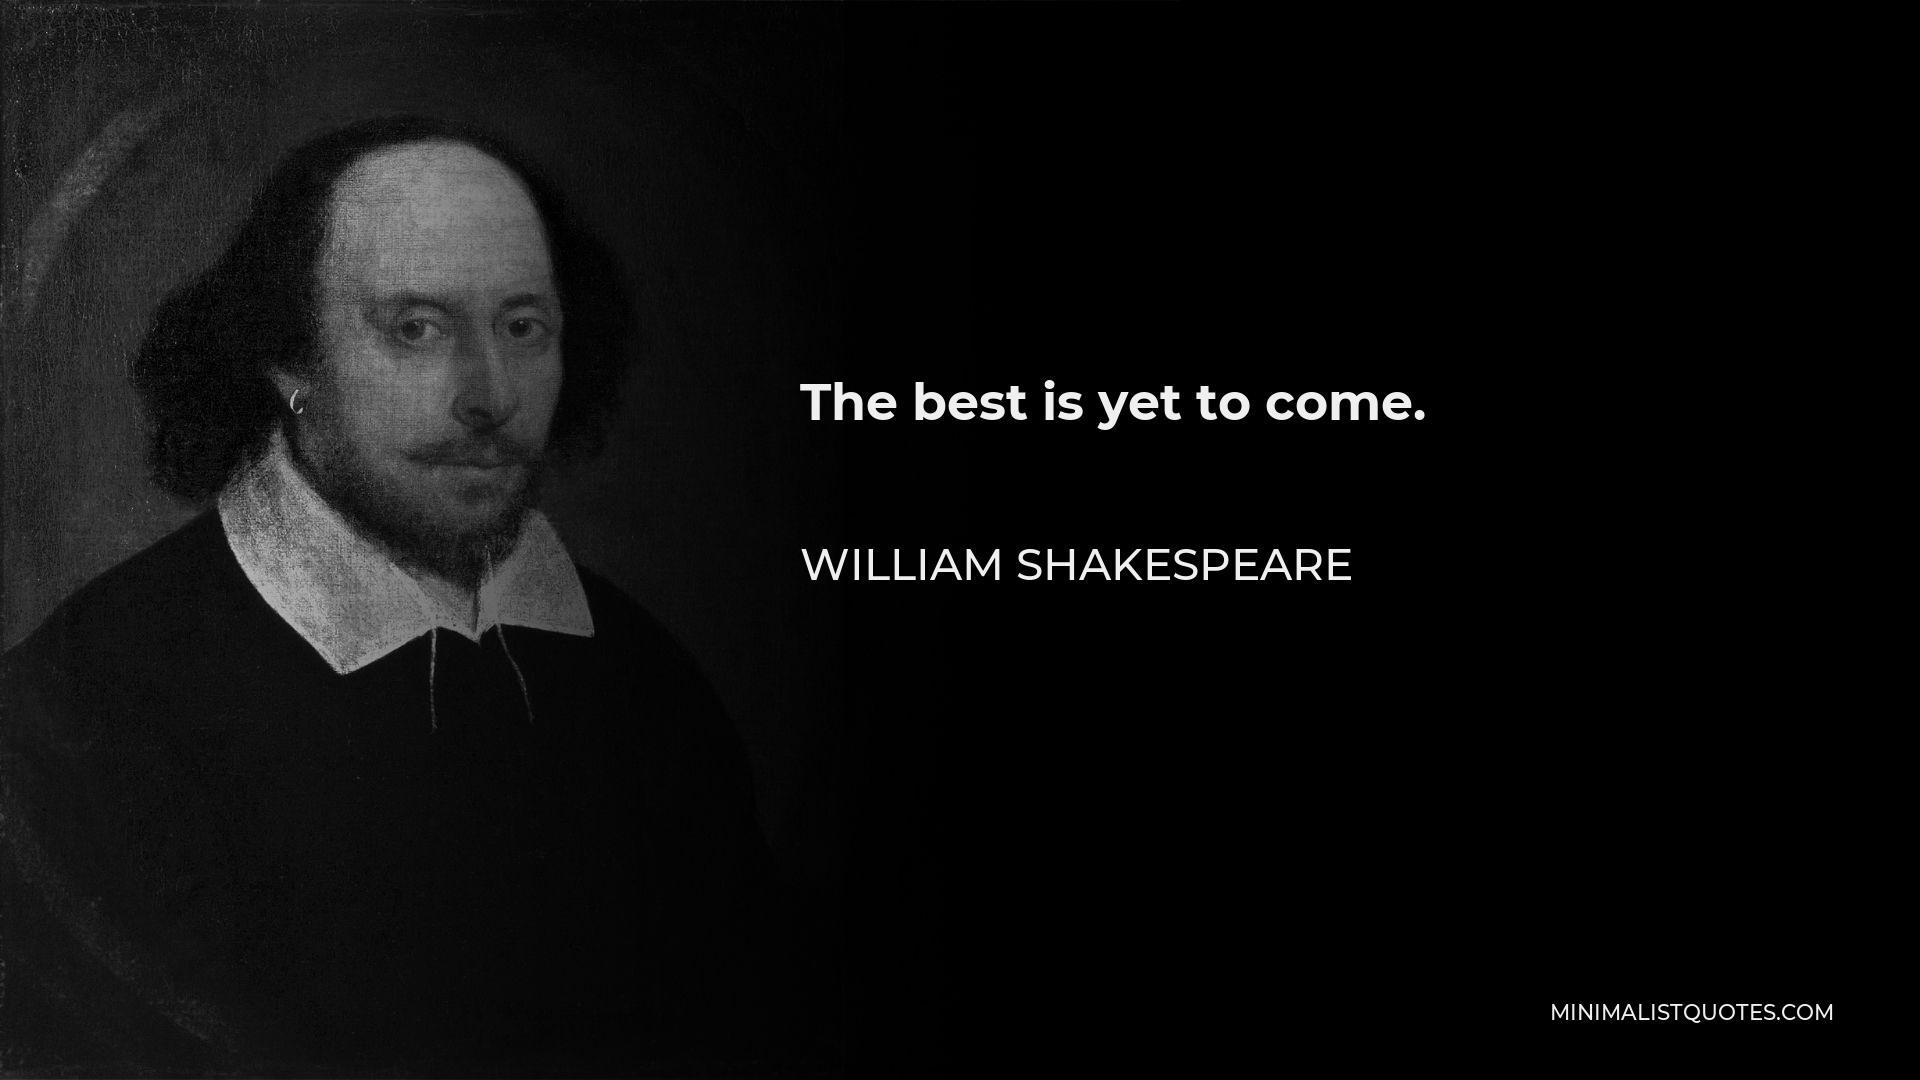 William Shakespeare Quote - The best is yet to come.